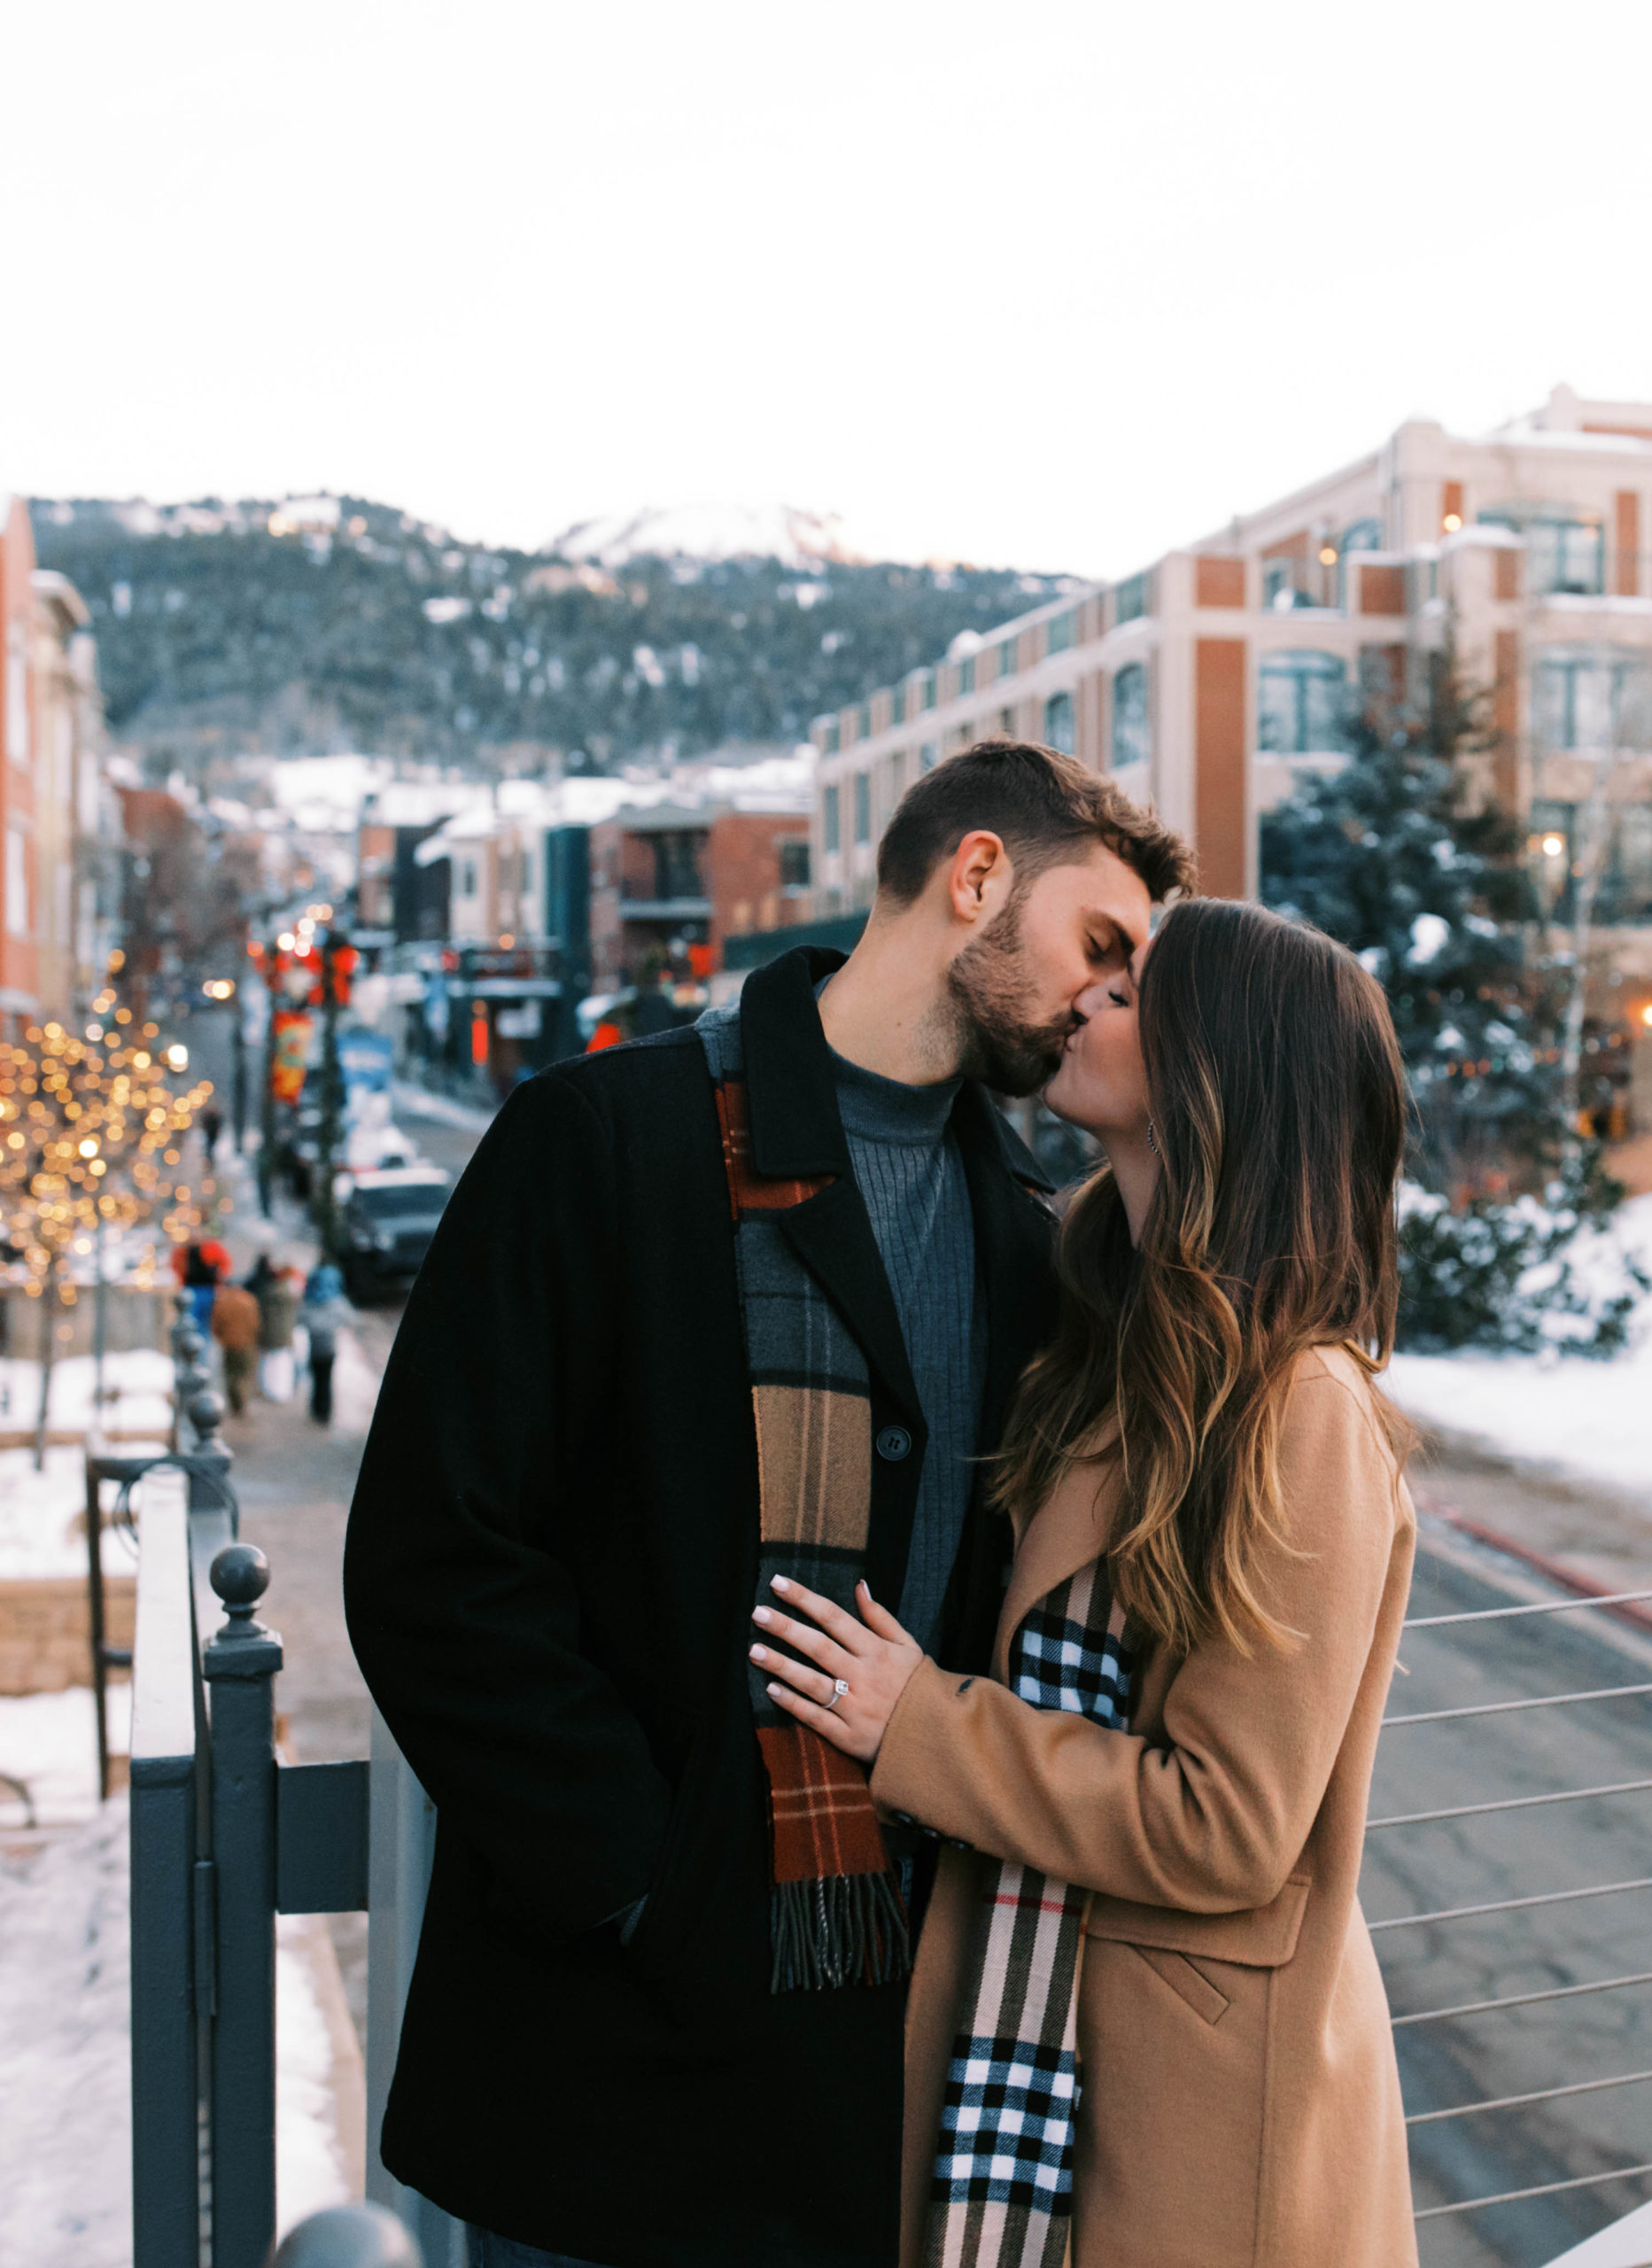 city holiday engagement photos, park city engagement photos, proposal photographer utah. photo taken by Megan Robinson Photography